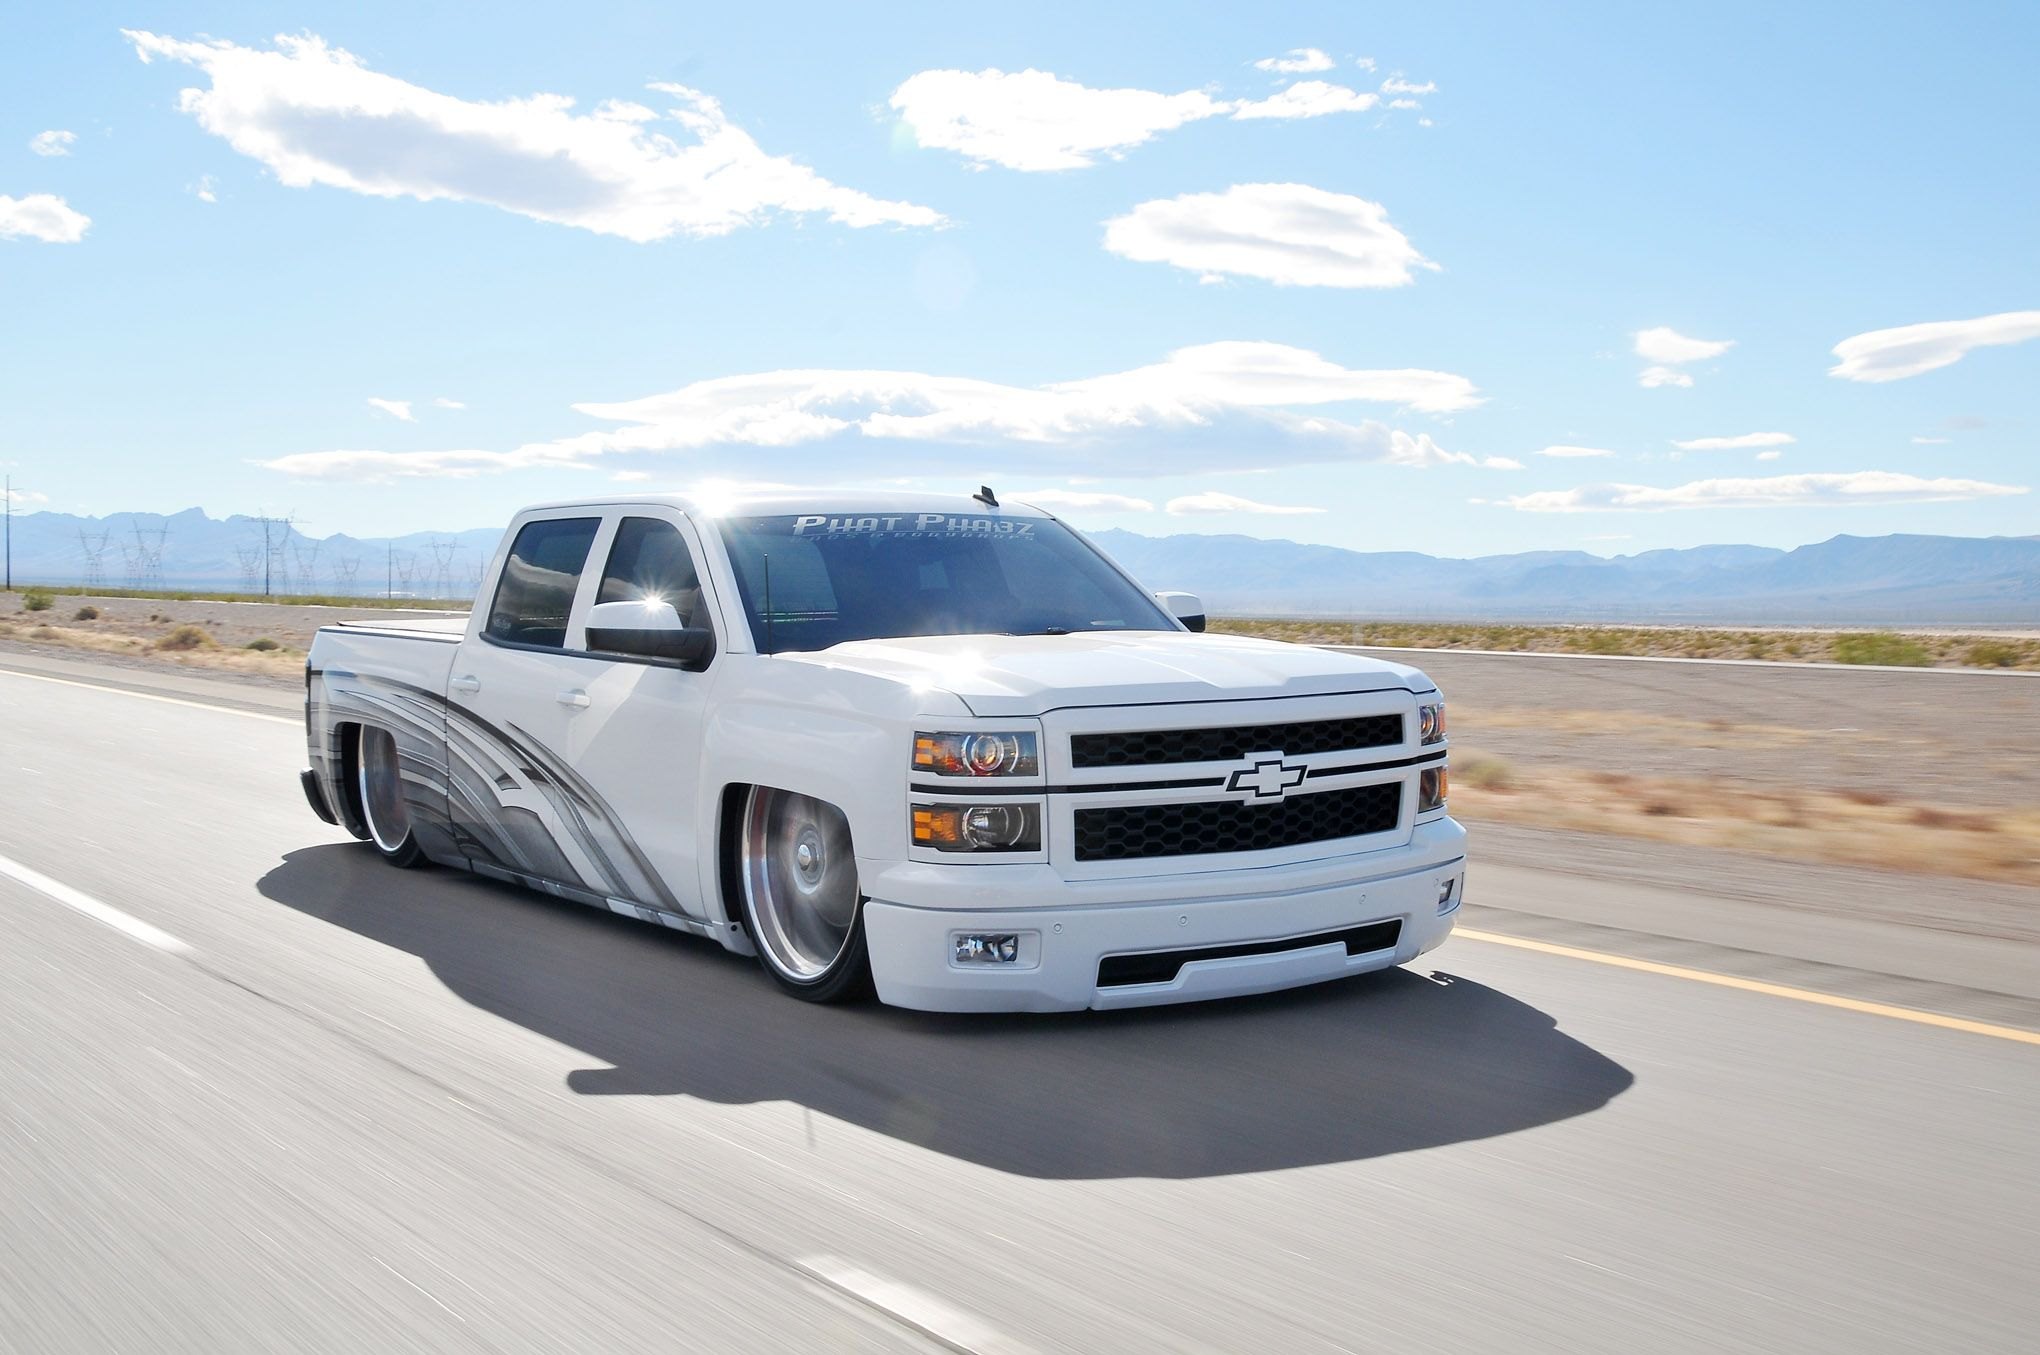 White Lowered Chevy Silverado with Custom Mesh Grille - Photo by Phil Gordo...